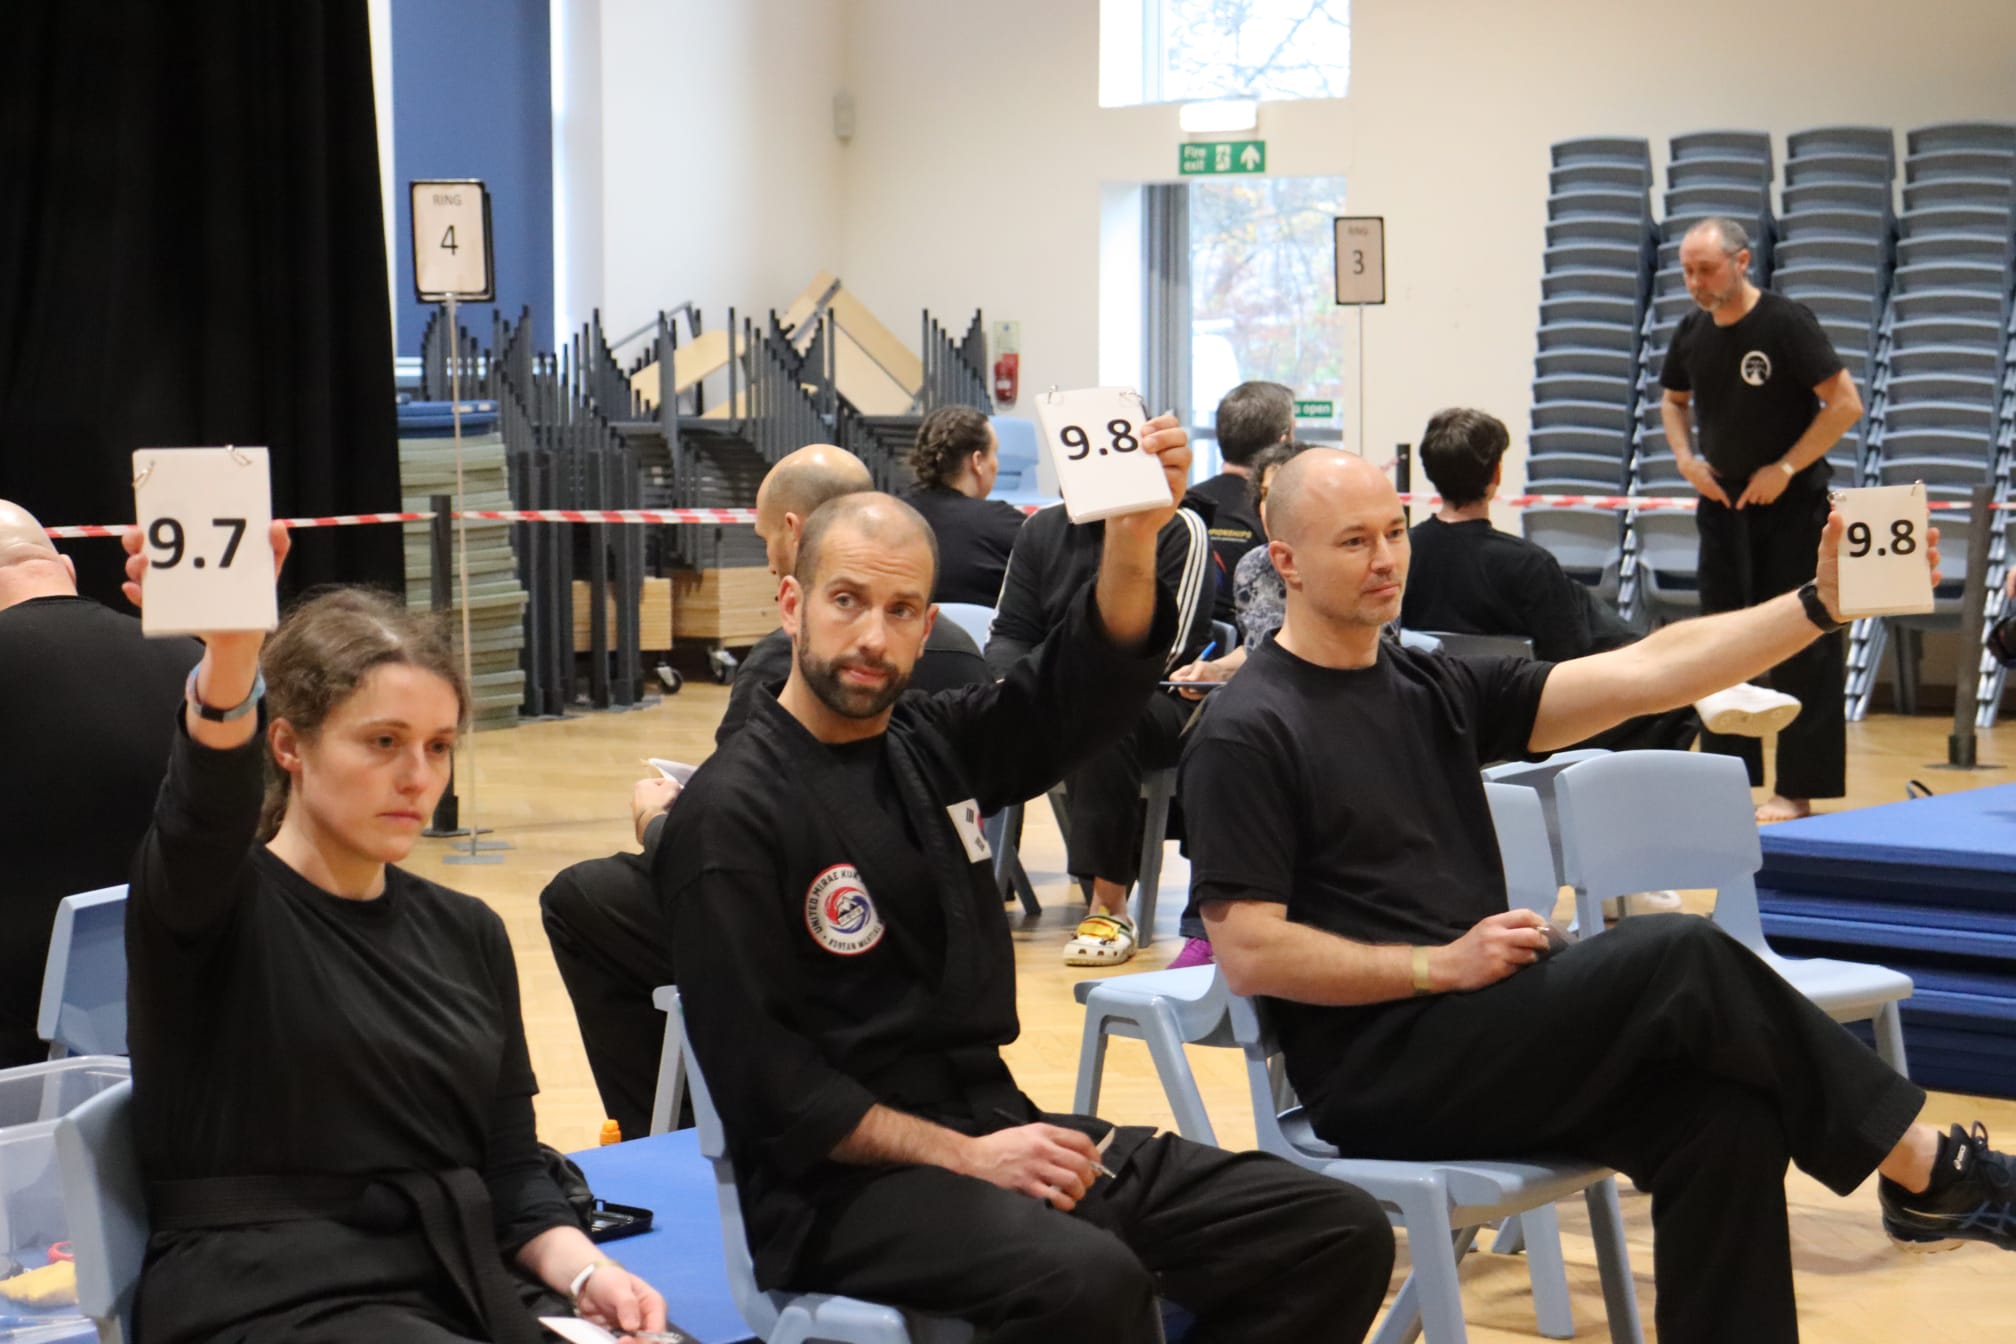 Images One Mind Martial Arts Academy